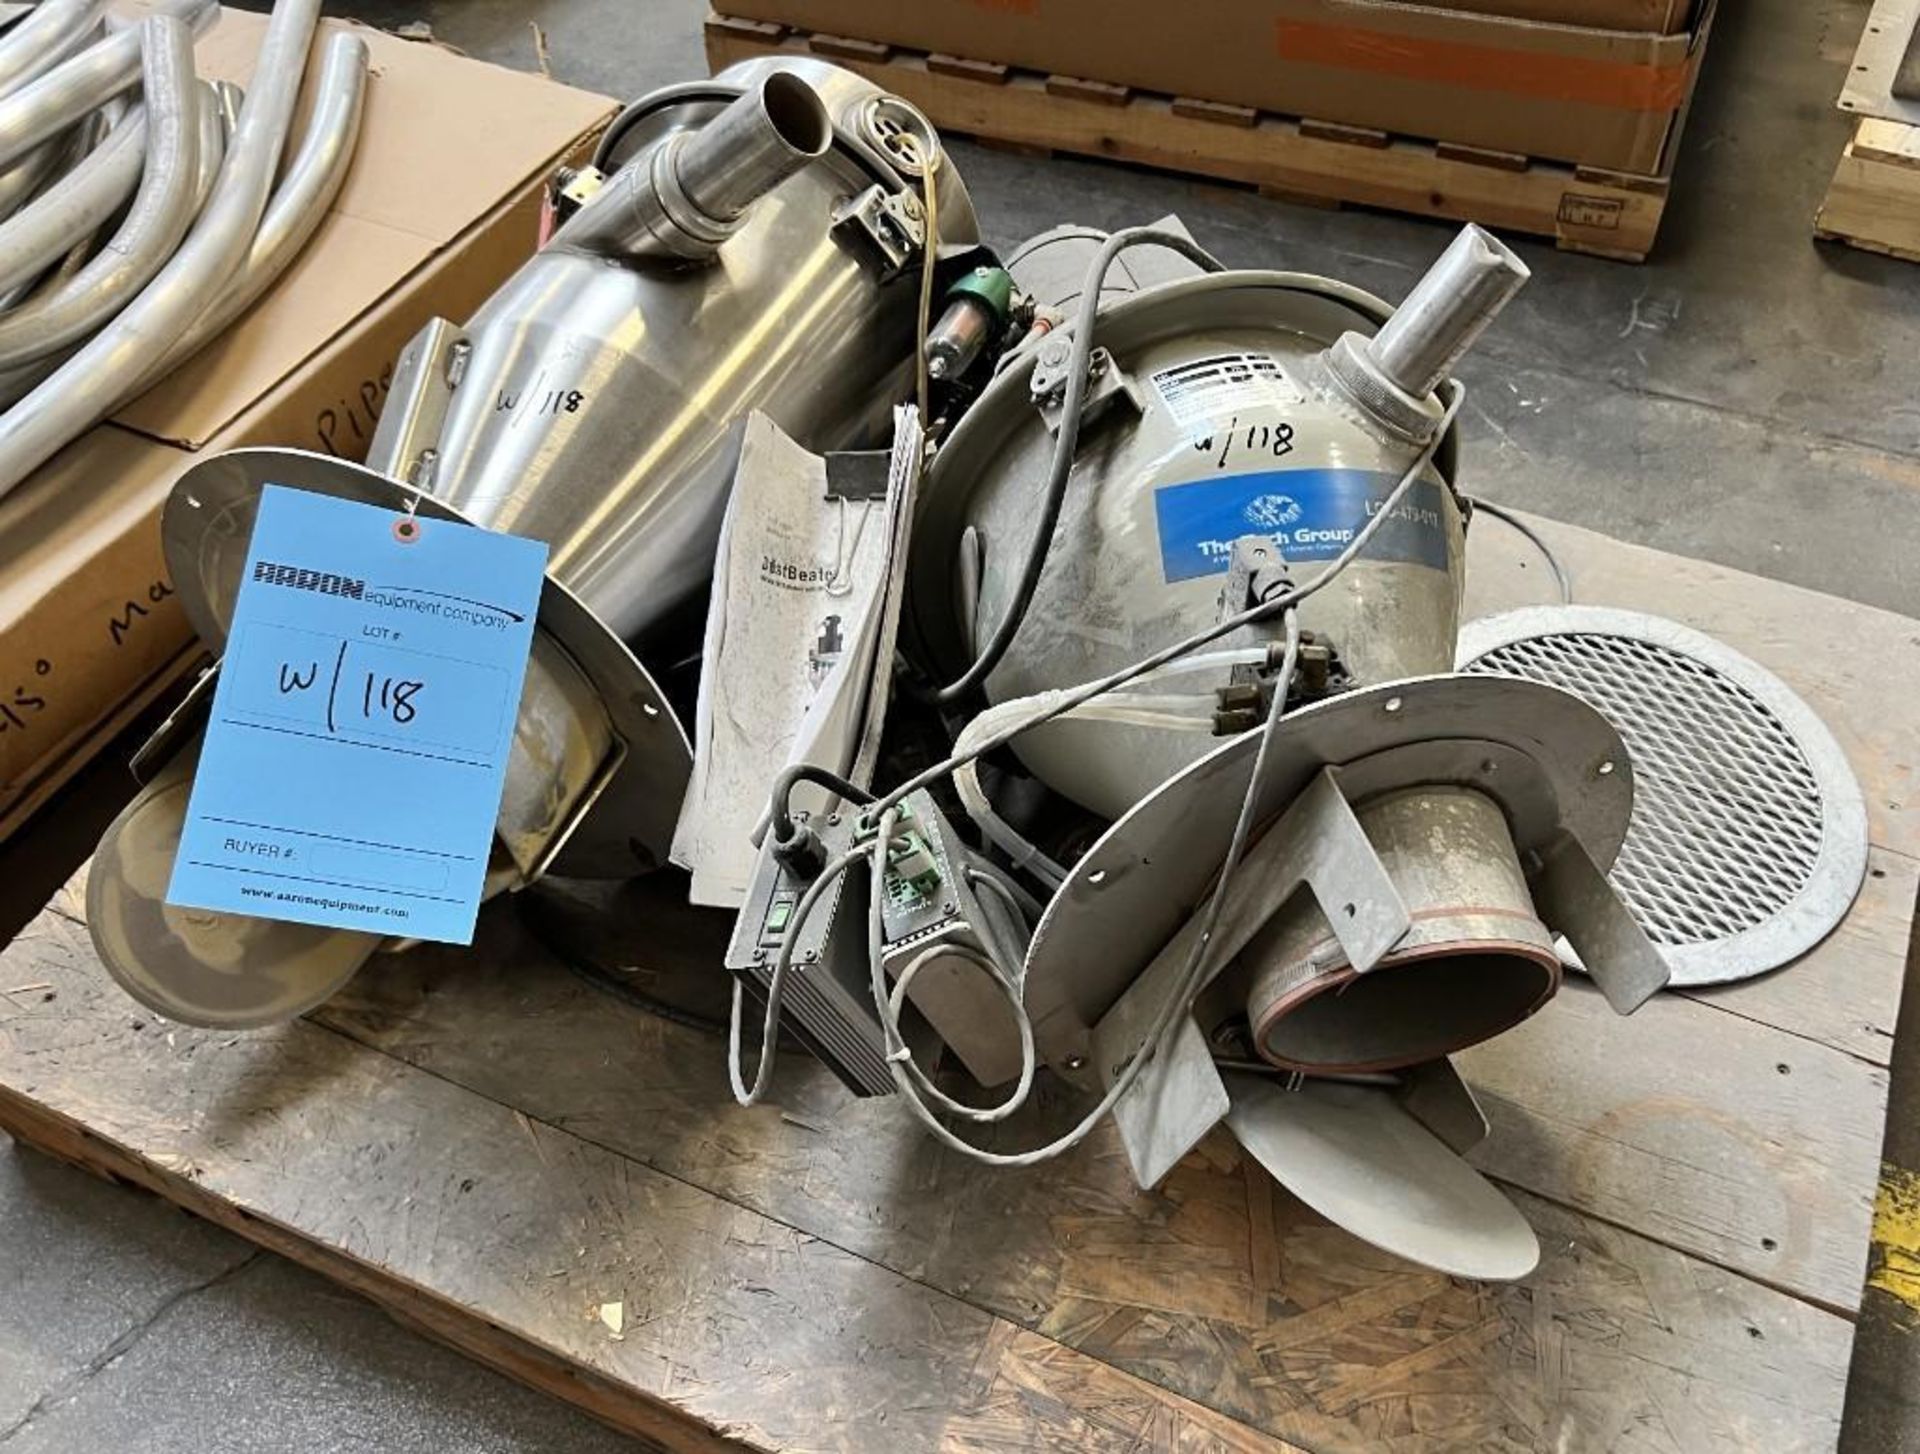 Lot Consisting Of (1) Accu-Rate feeder, (3) vacuum loaders. (Rigging/Loading Fee = $100) - Image 6 of 8